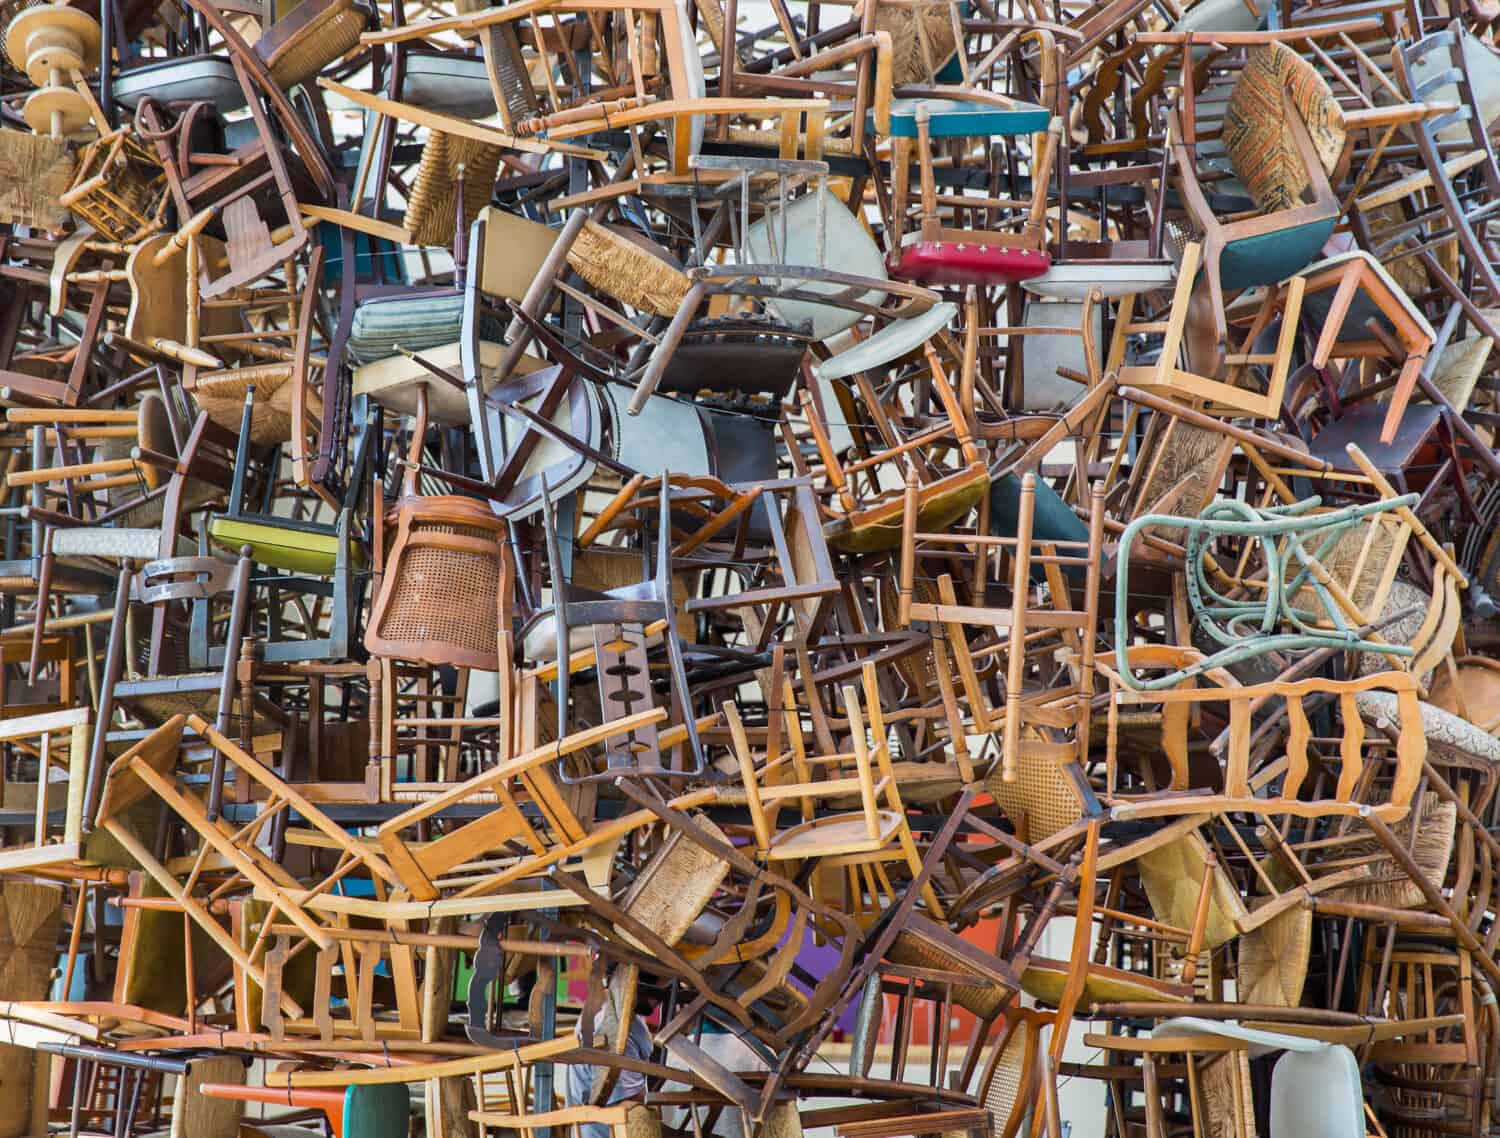 Stack of assorted metal and wooden chairs in random disarray, full frame furniture background image